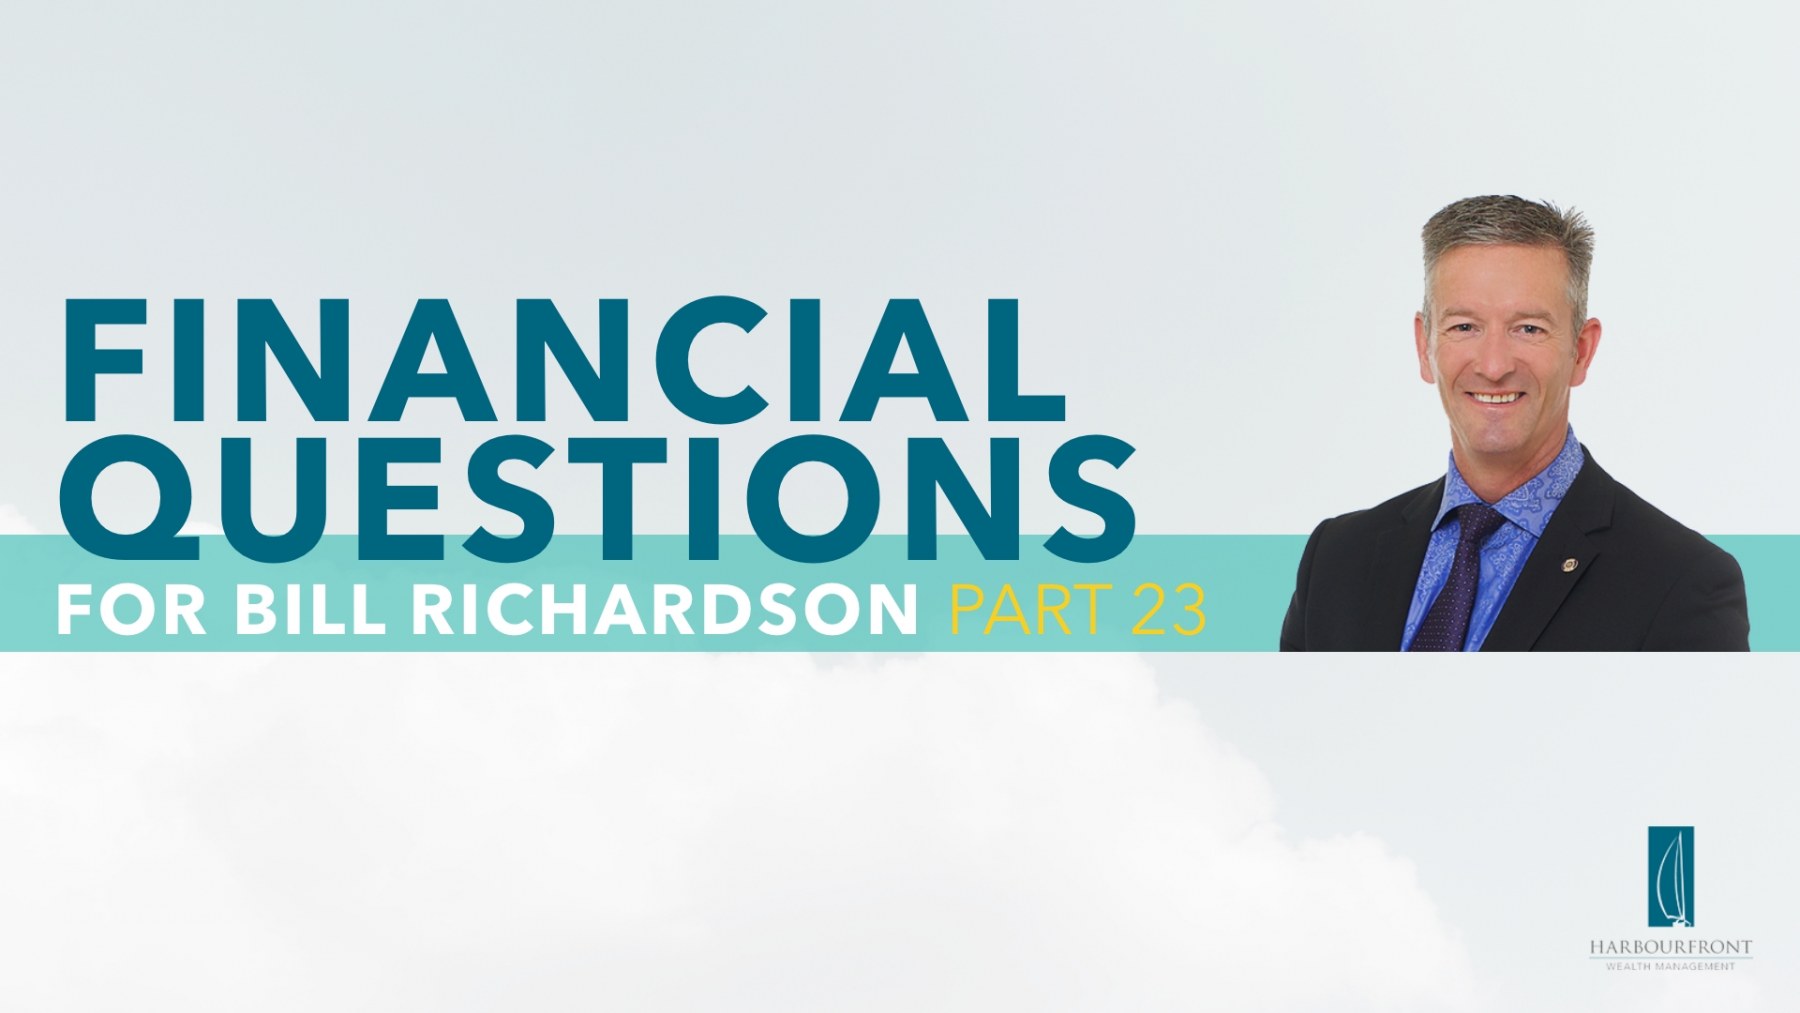 Financial Questions with Bill Richardson PART 23